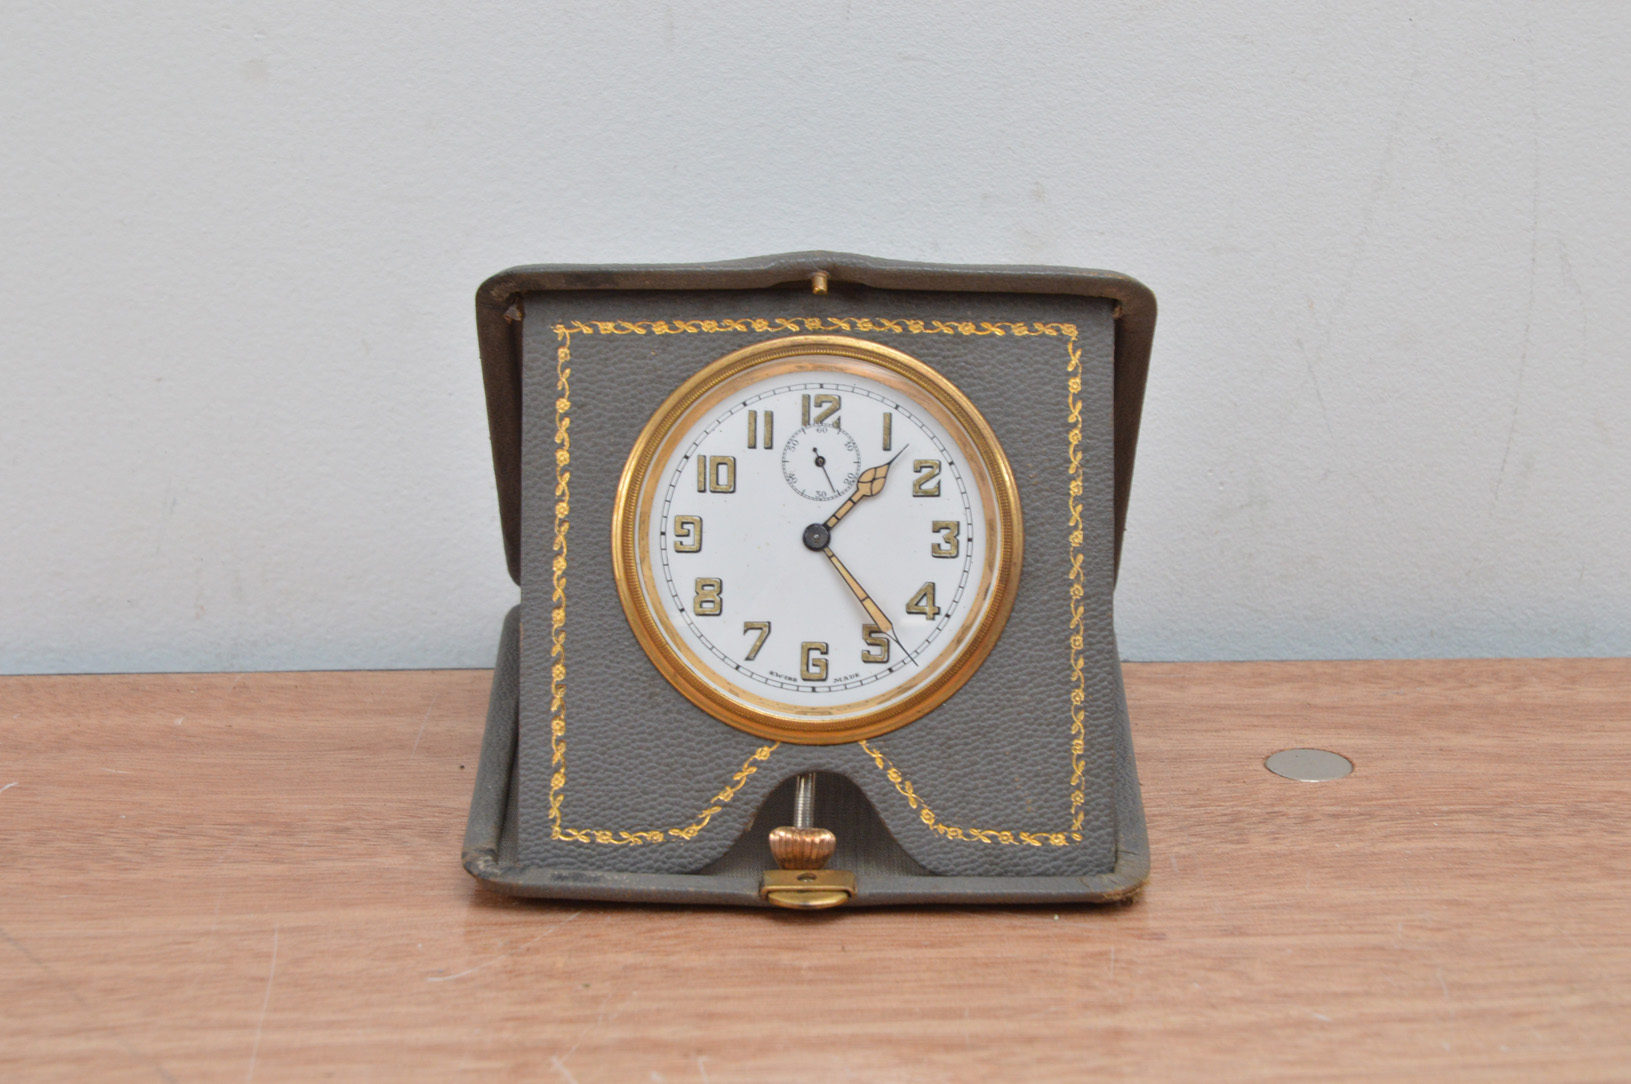 A 1930's travelling clock, in a foldable leatherette case, the dial with Arabic numerals, case